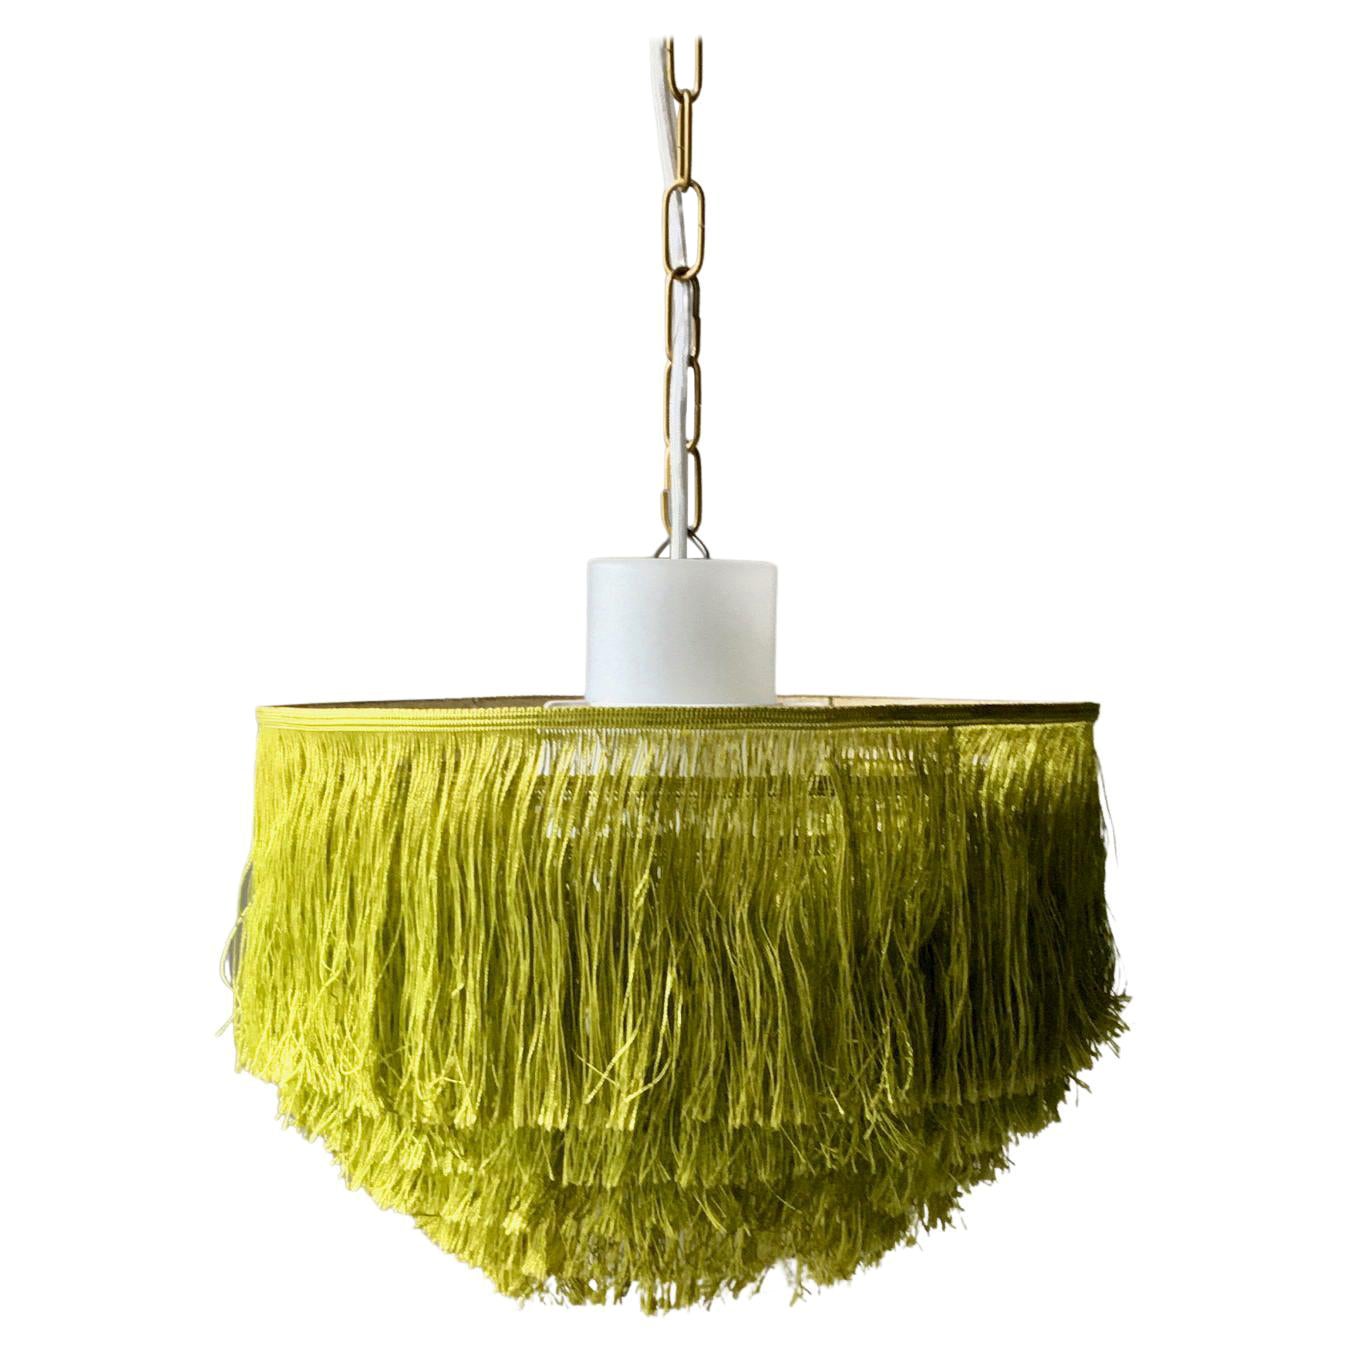 Green Fringe Light with Glass Liner By Hans-Agne Jakobsson, Sweden '2 Available'